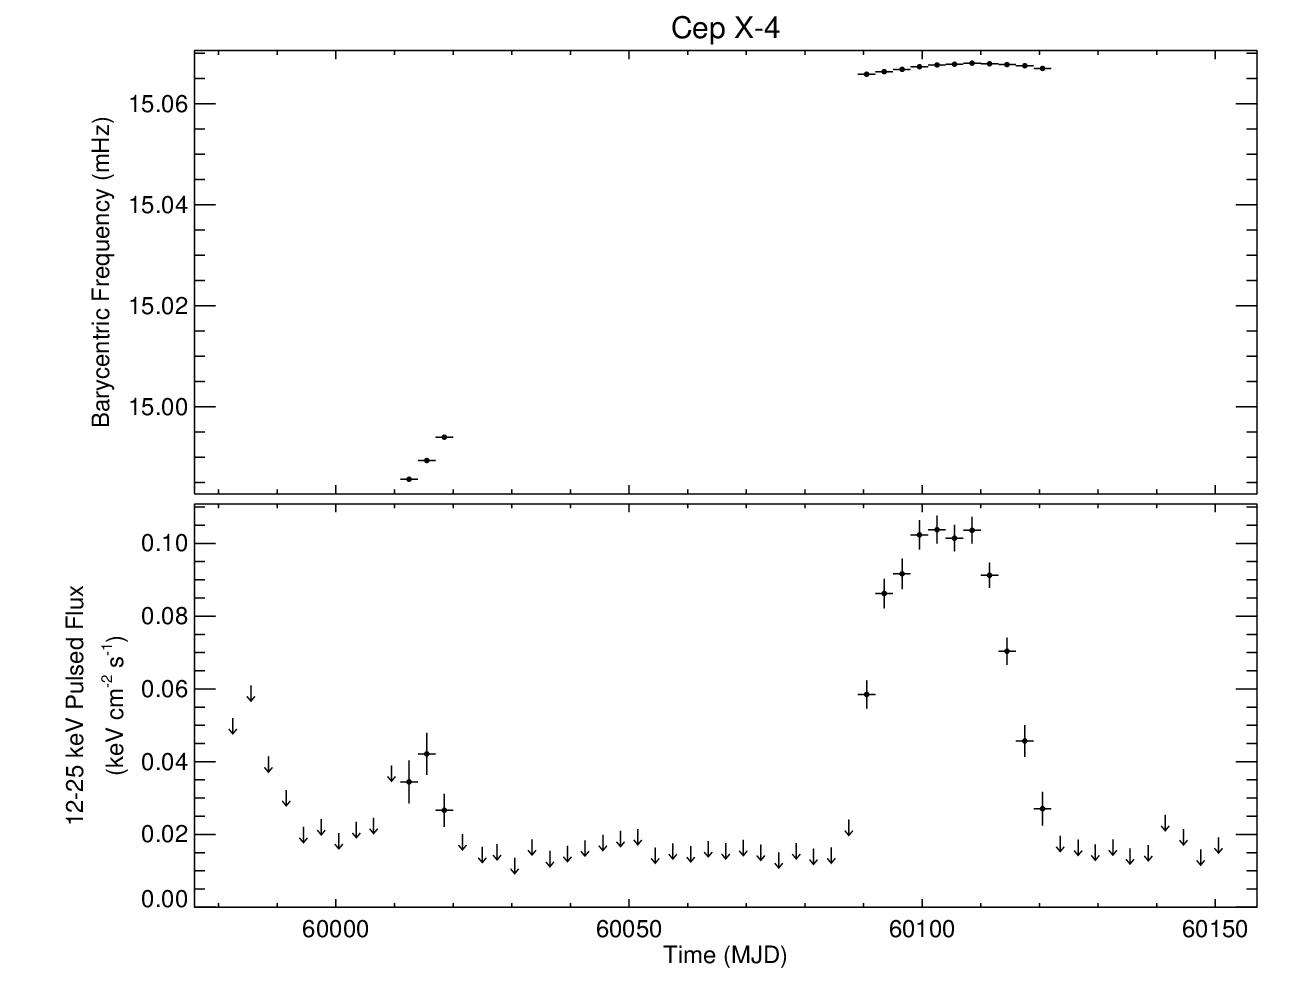 Cep X-4 Short Frequency History